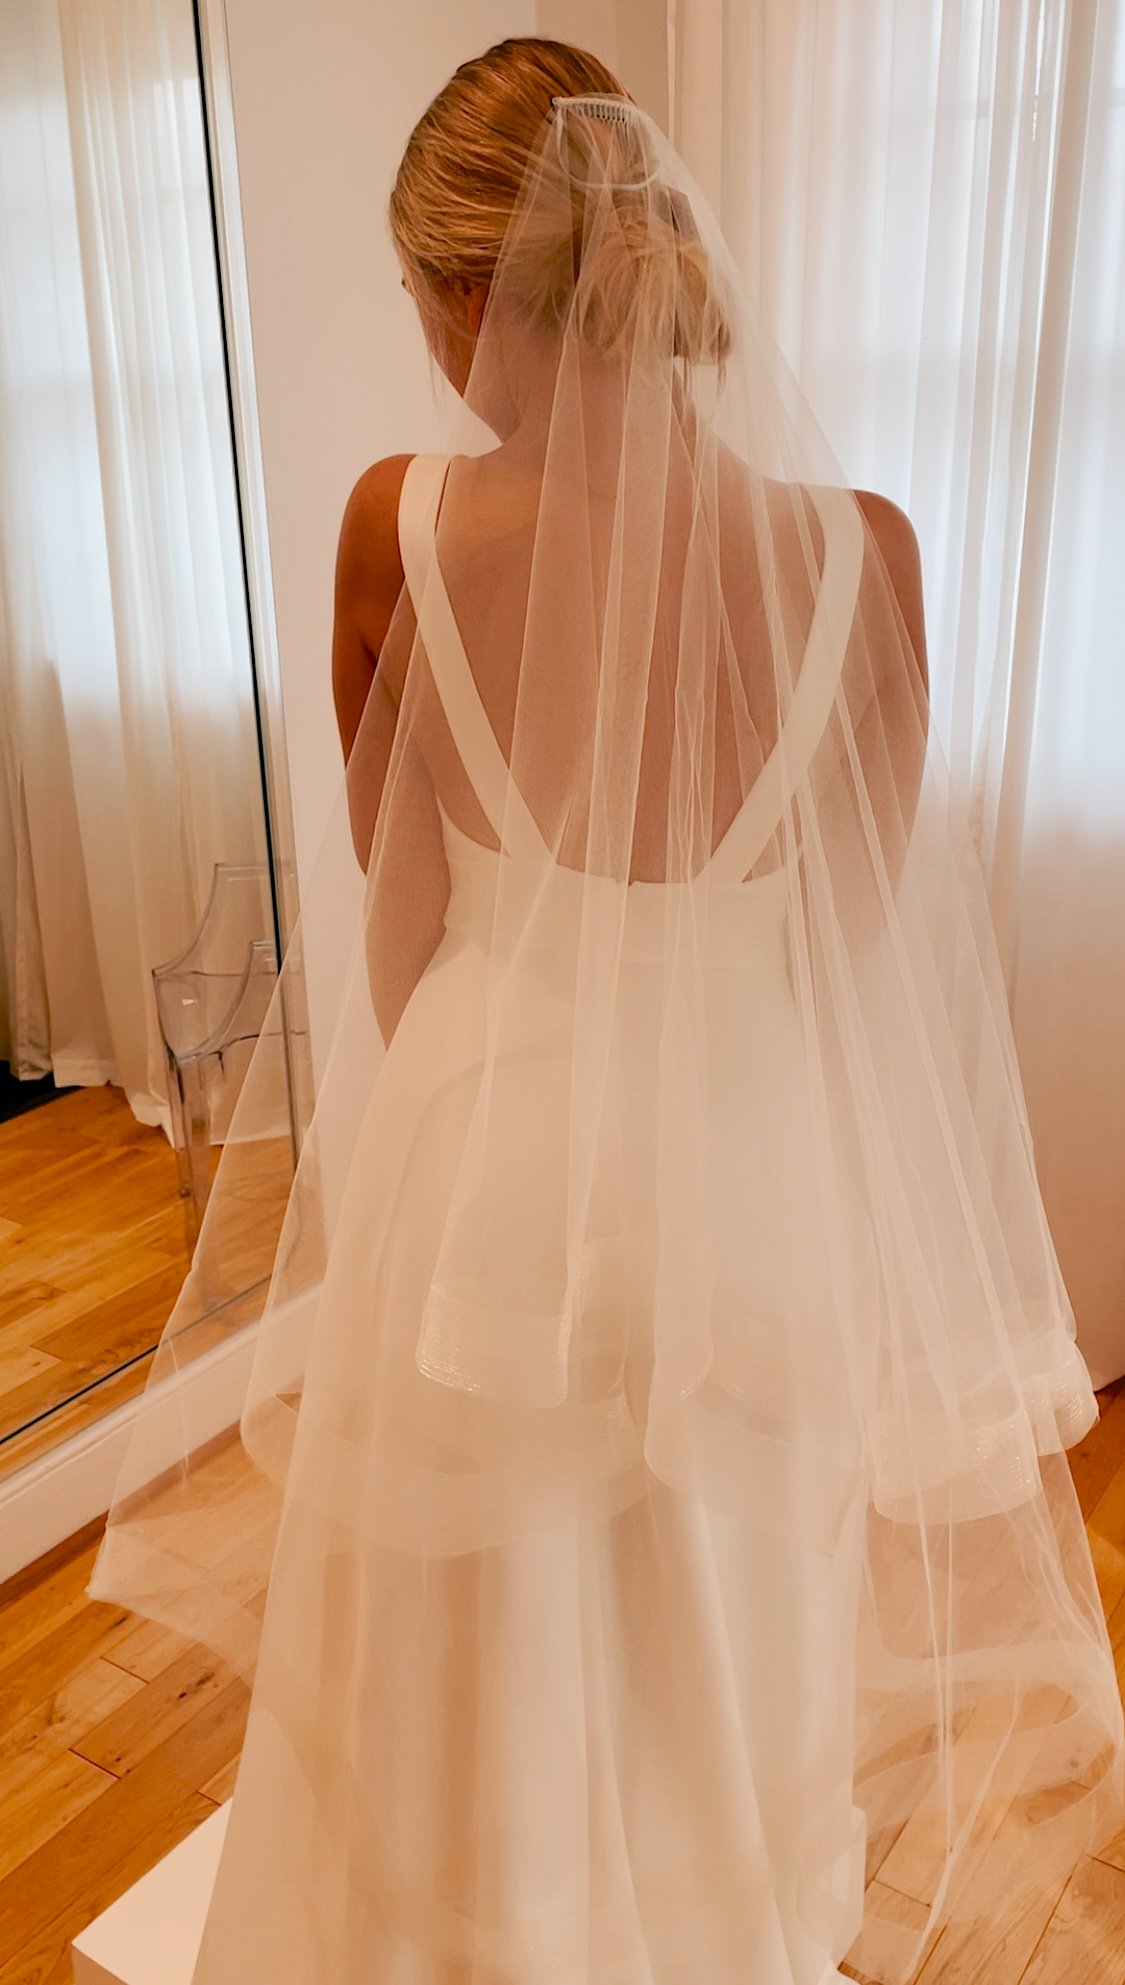  Why should you wear wedding veils? Pros and cons of wedding veils! 